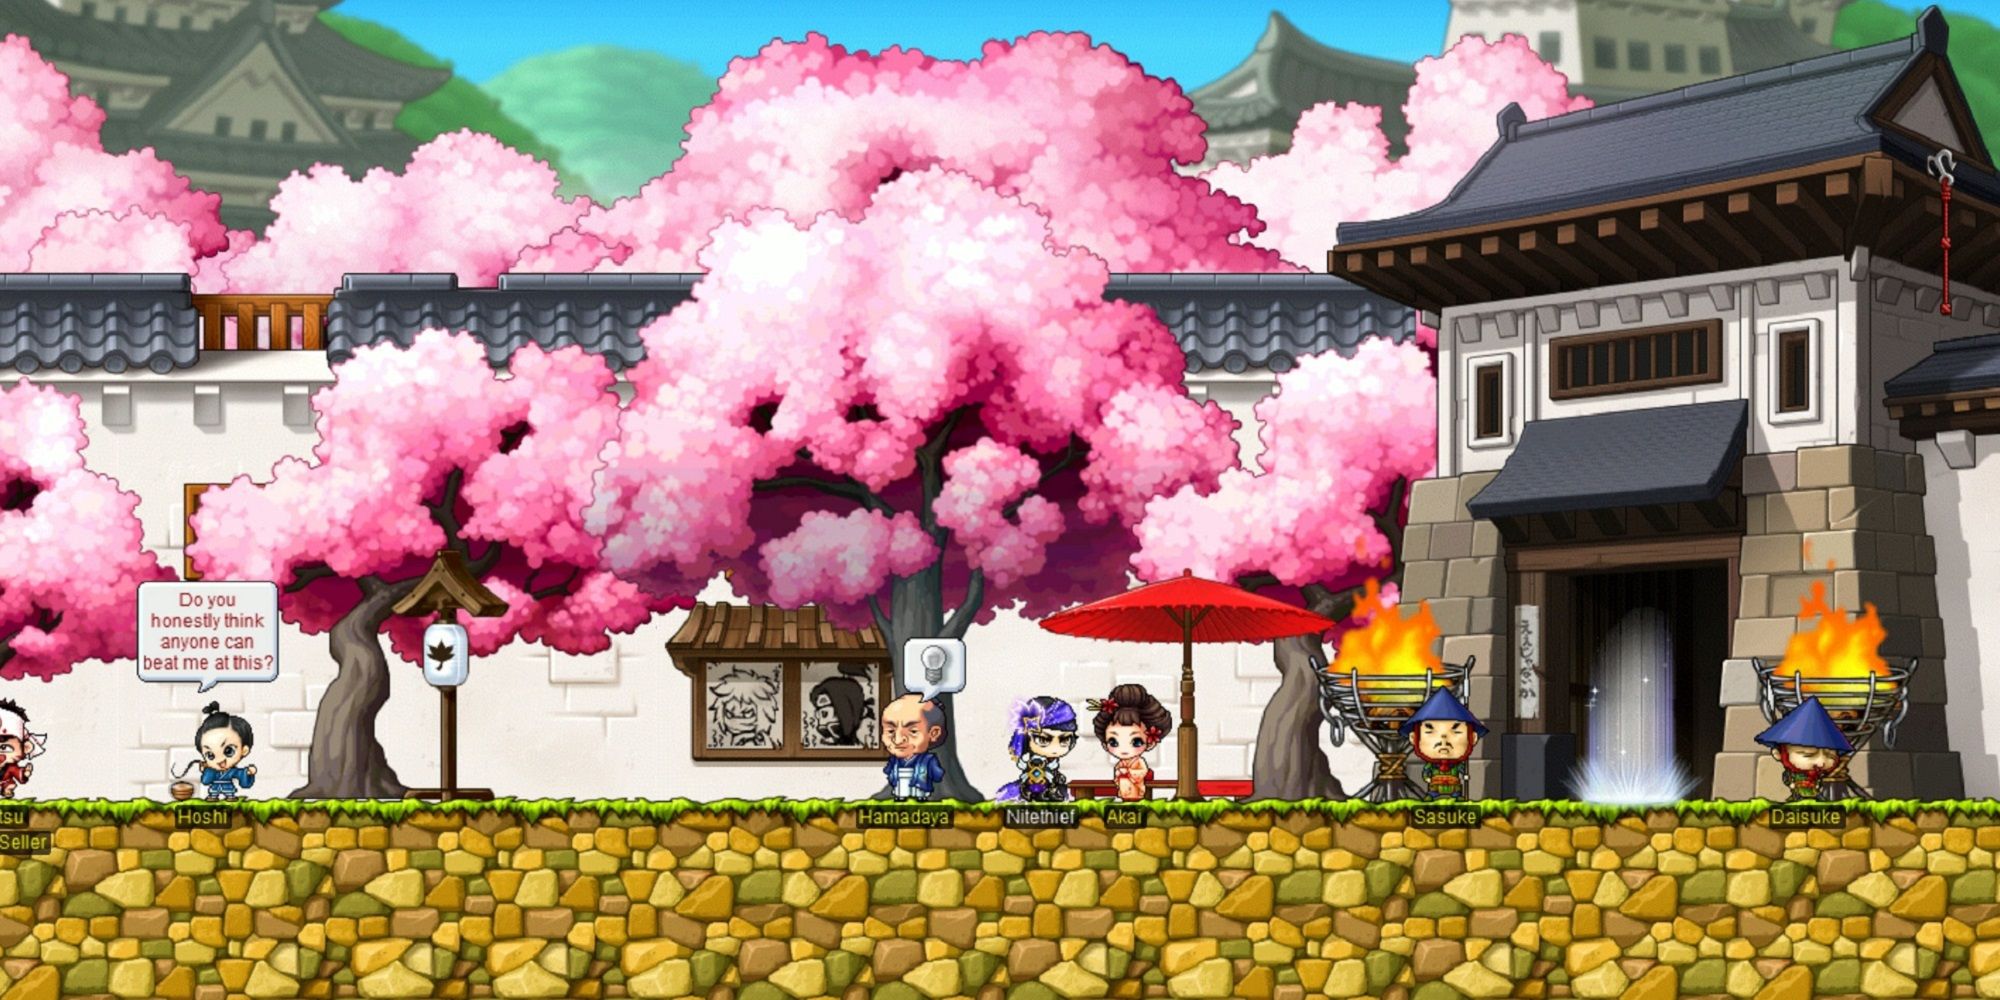 maplestory characters in front of pink cherry blossom trees